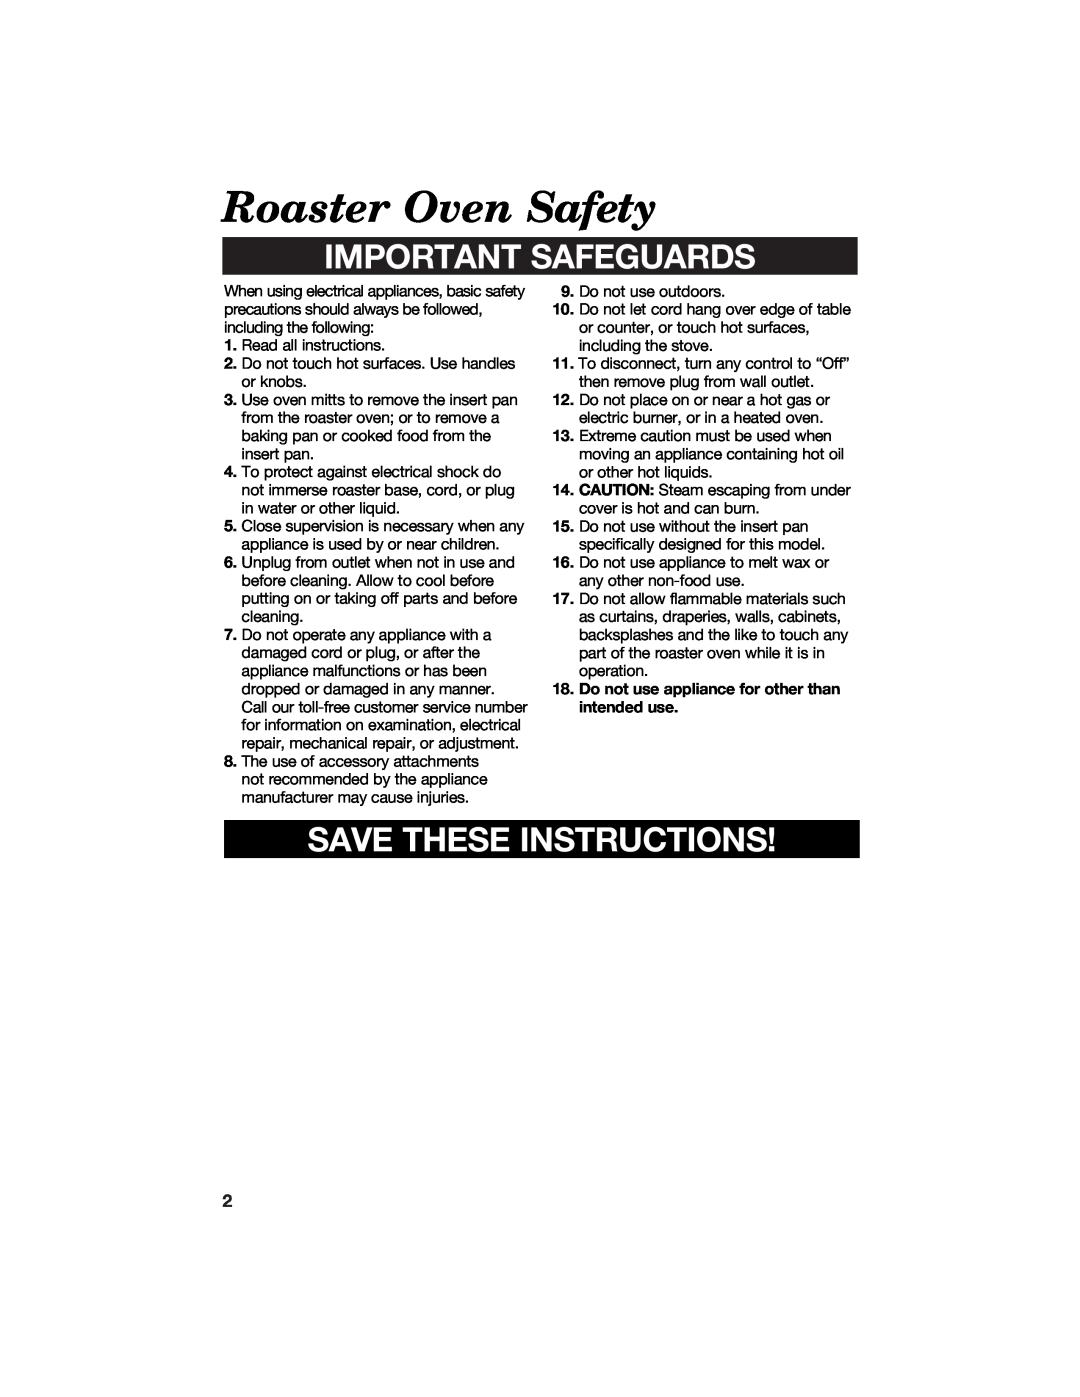 Hamilton Beach 840104300 manual Roaster Oven Safety, Important Safeguards, Save These Instructions 